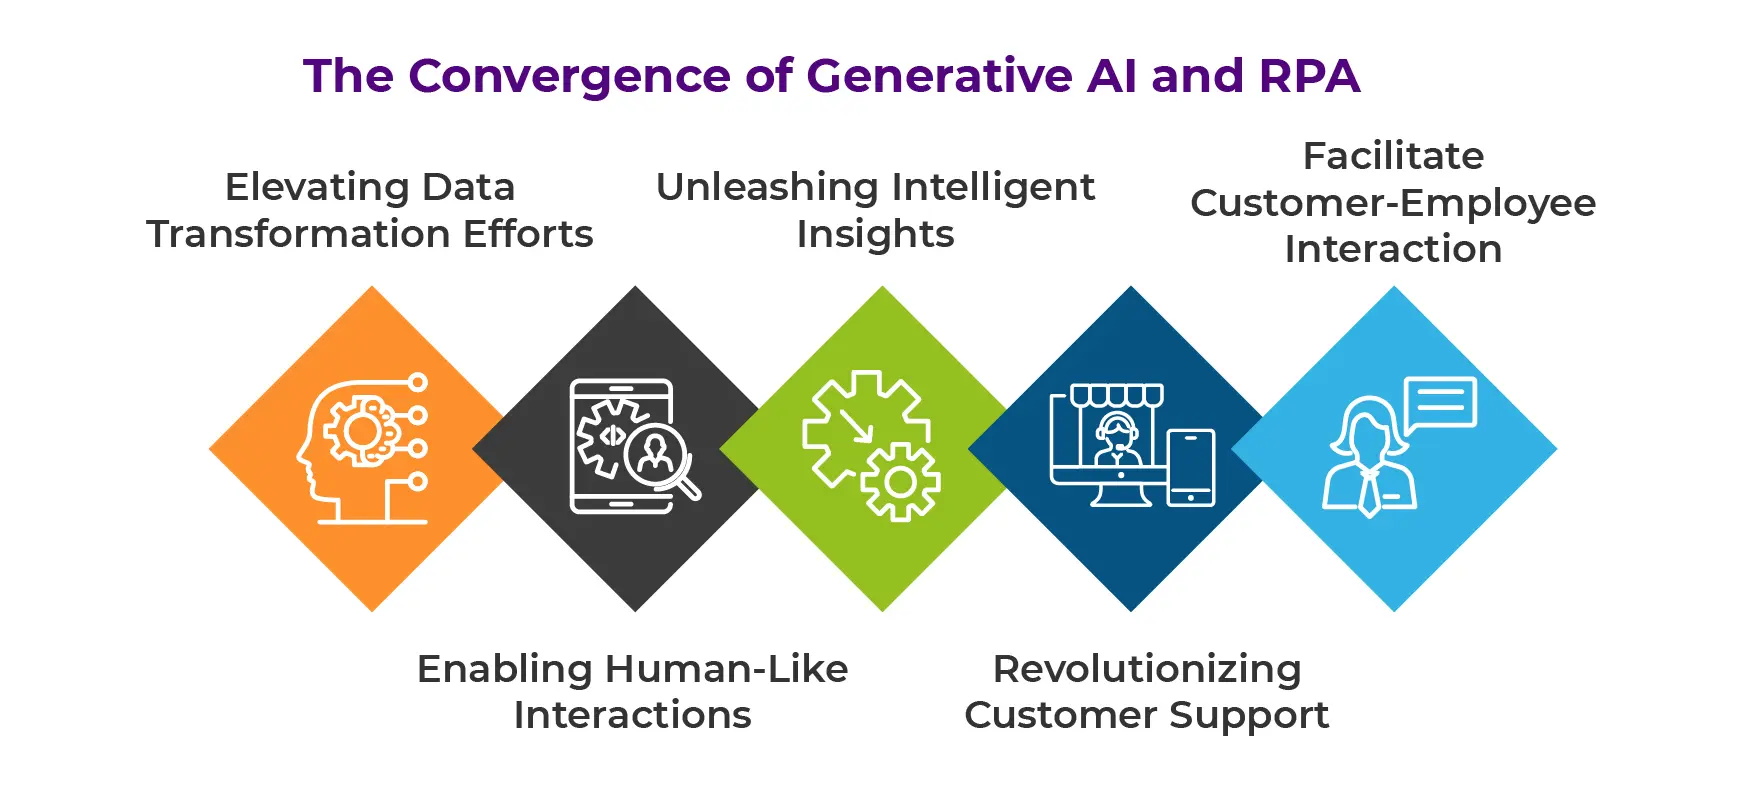 The Convergence of Generative AI and RPA